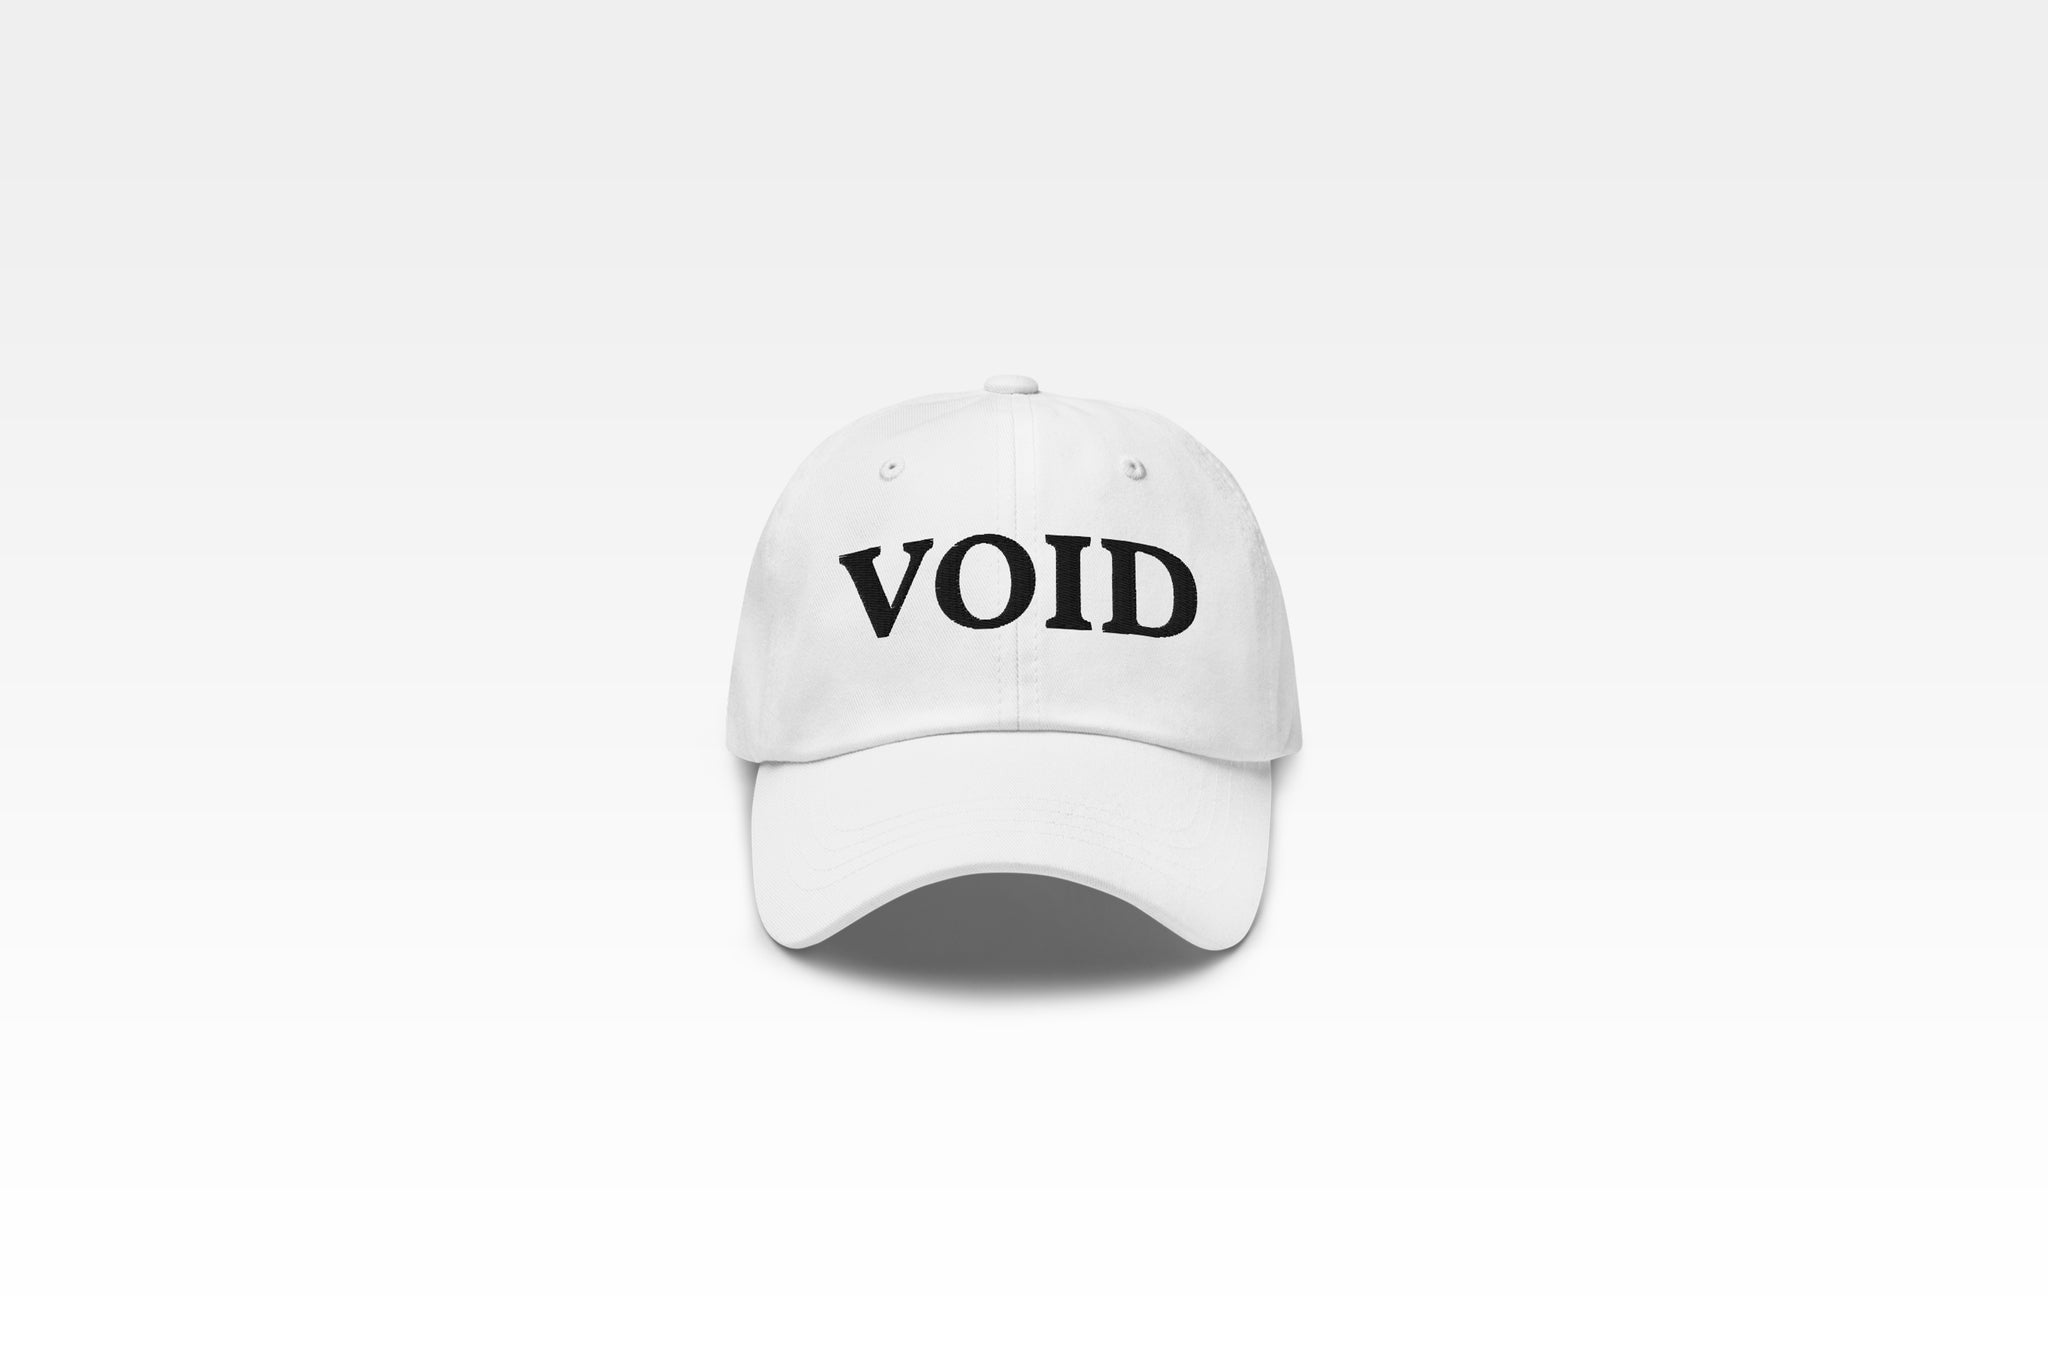 The Deluge Void Hat